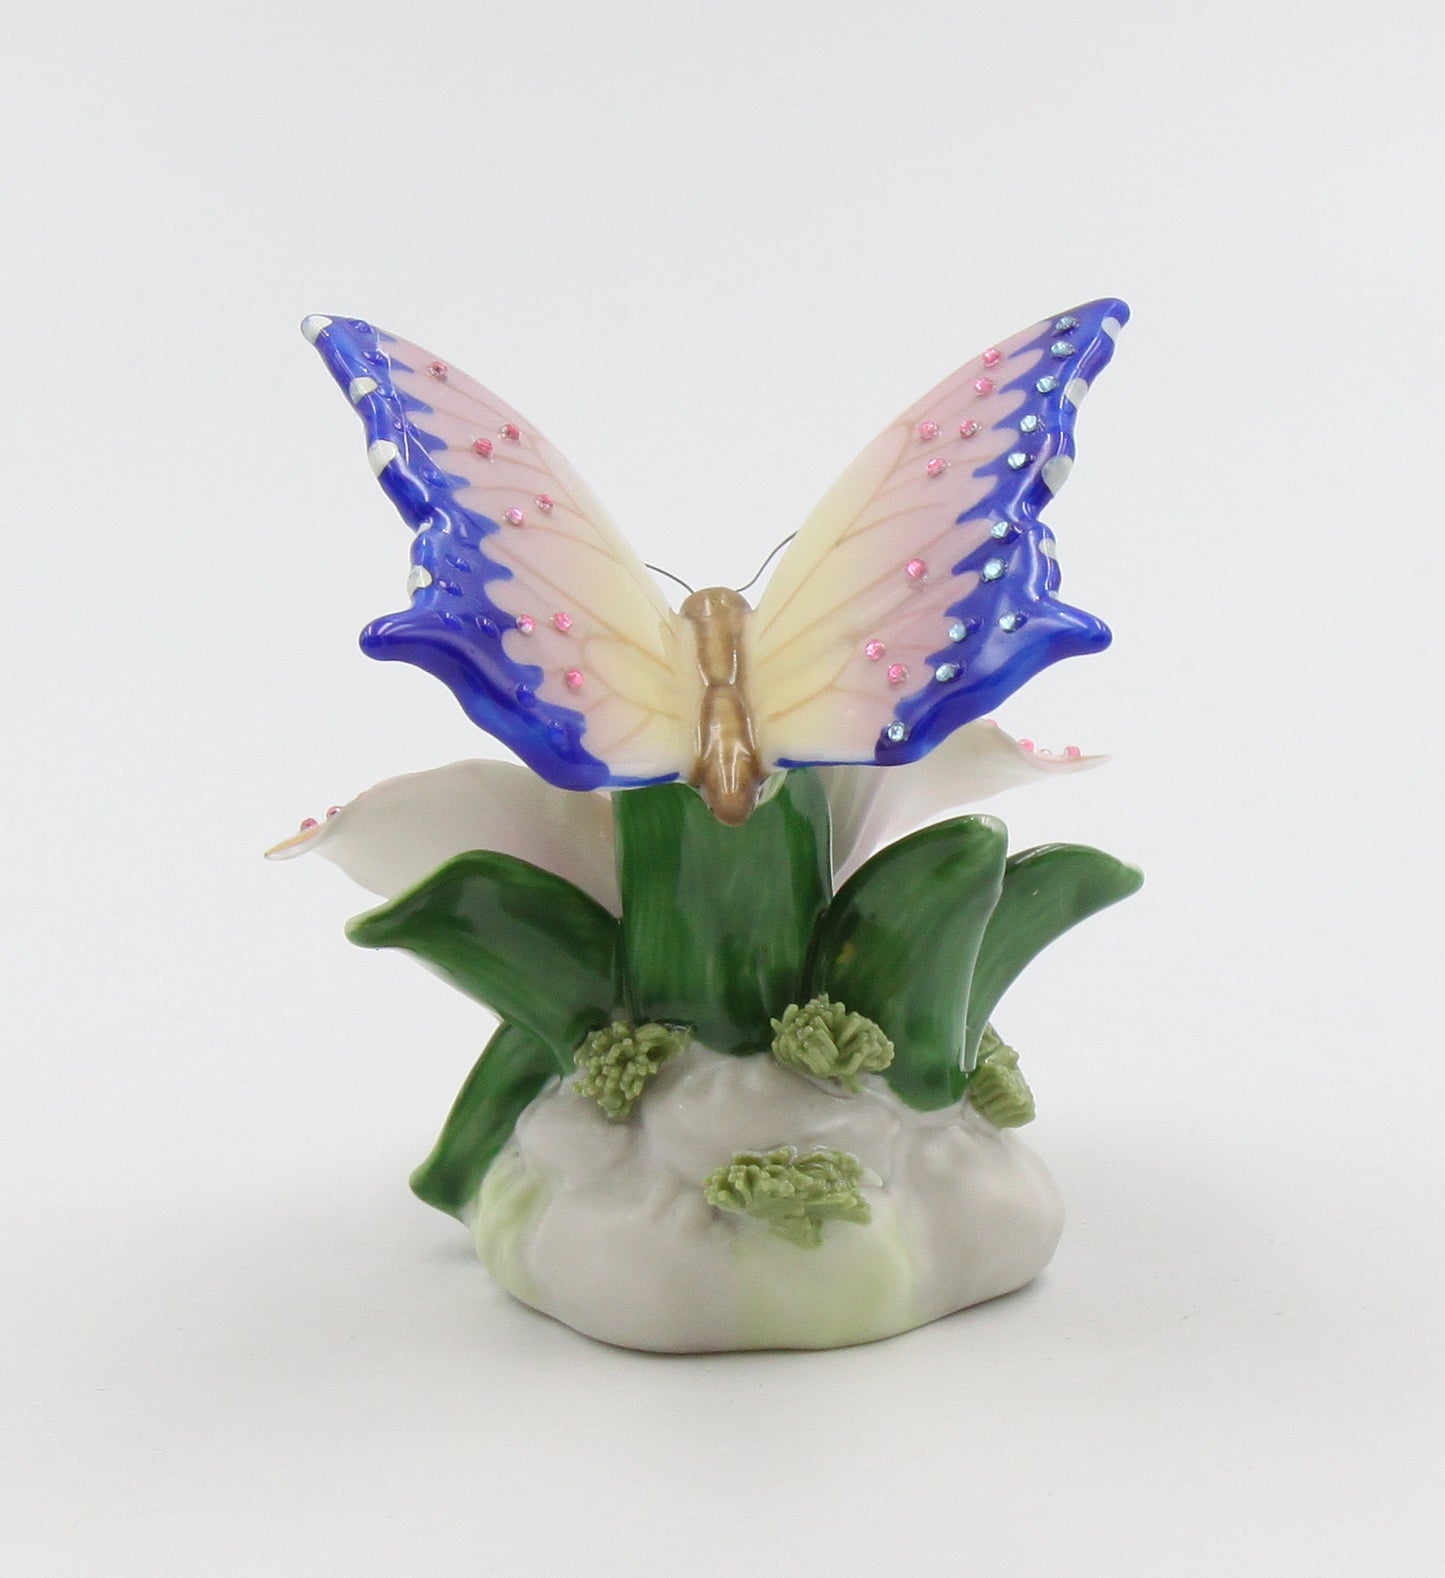 Ceramic Glittering Butterfly and Lily Flower in Bloom Figurine, Home Décor, Gift for Her, Gift for Mom, Nature Lover Décor, Cottagecore